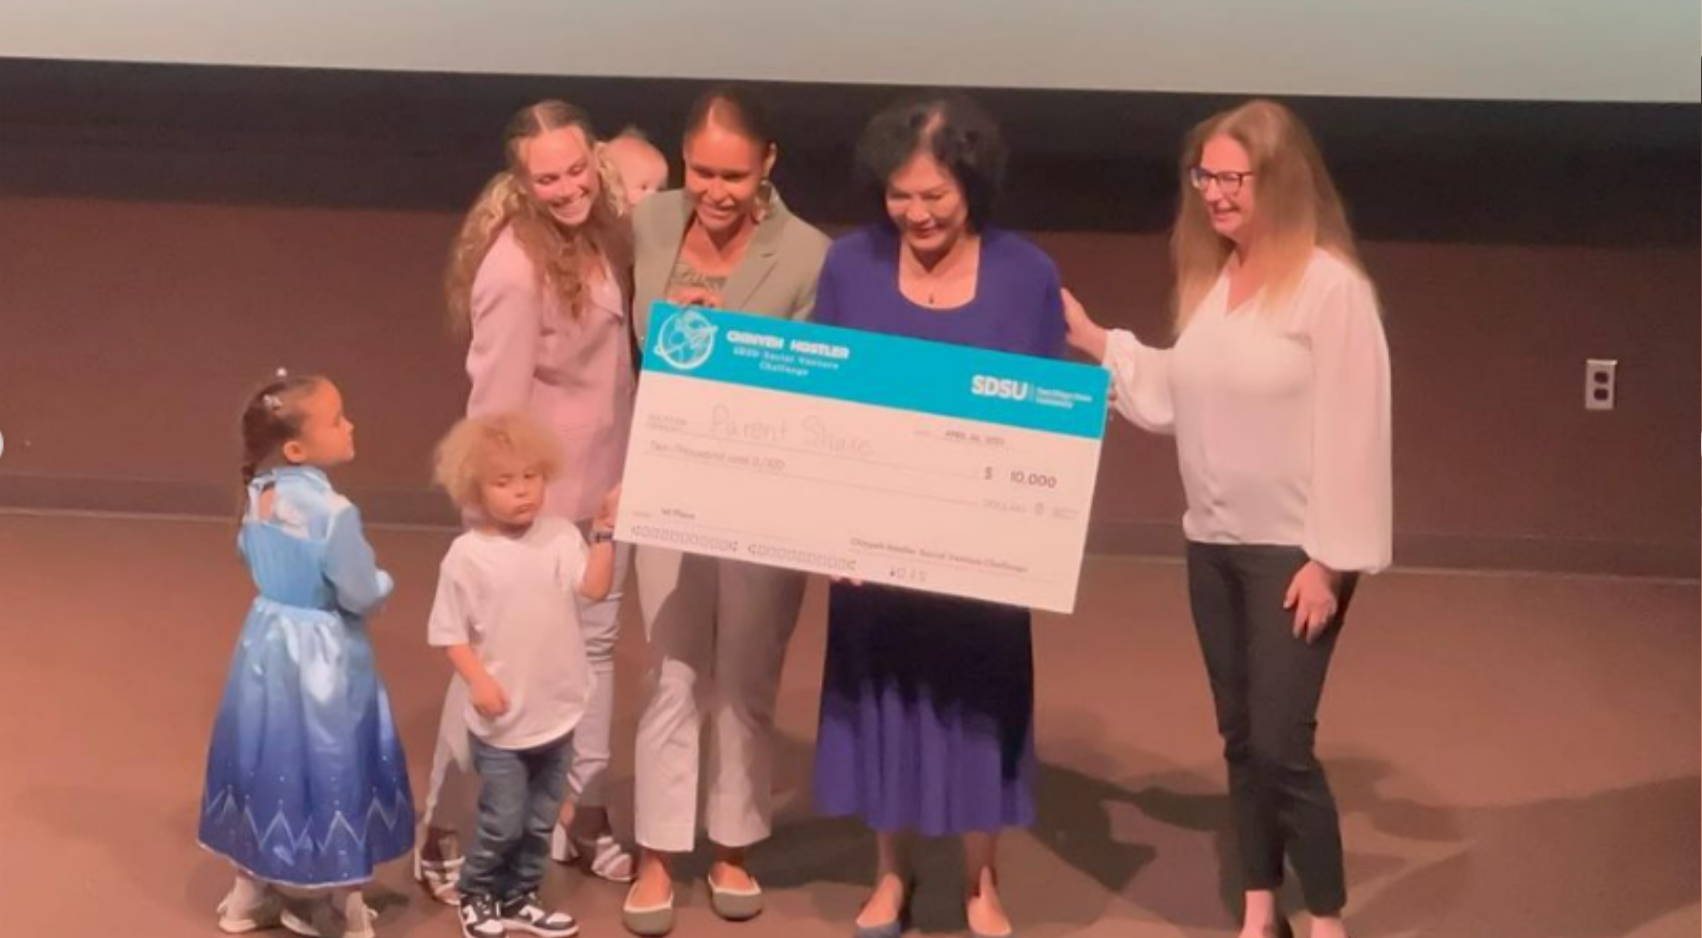 Chinyeh Hostler (second from right) and Cathy Pucher (right) of the ZIP Launchpad present the winning check to the founders of Parent Share. (SDSU)